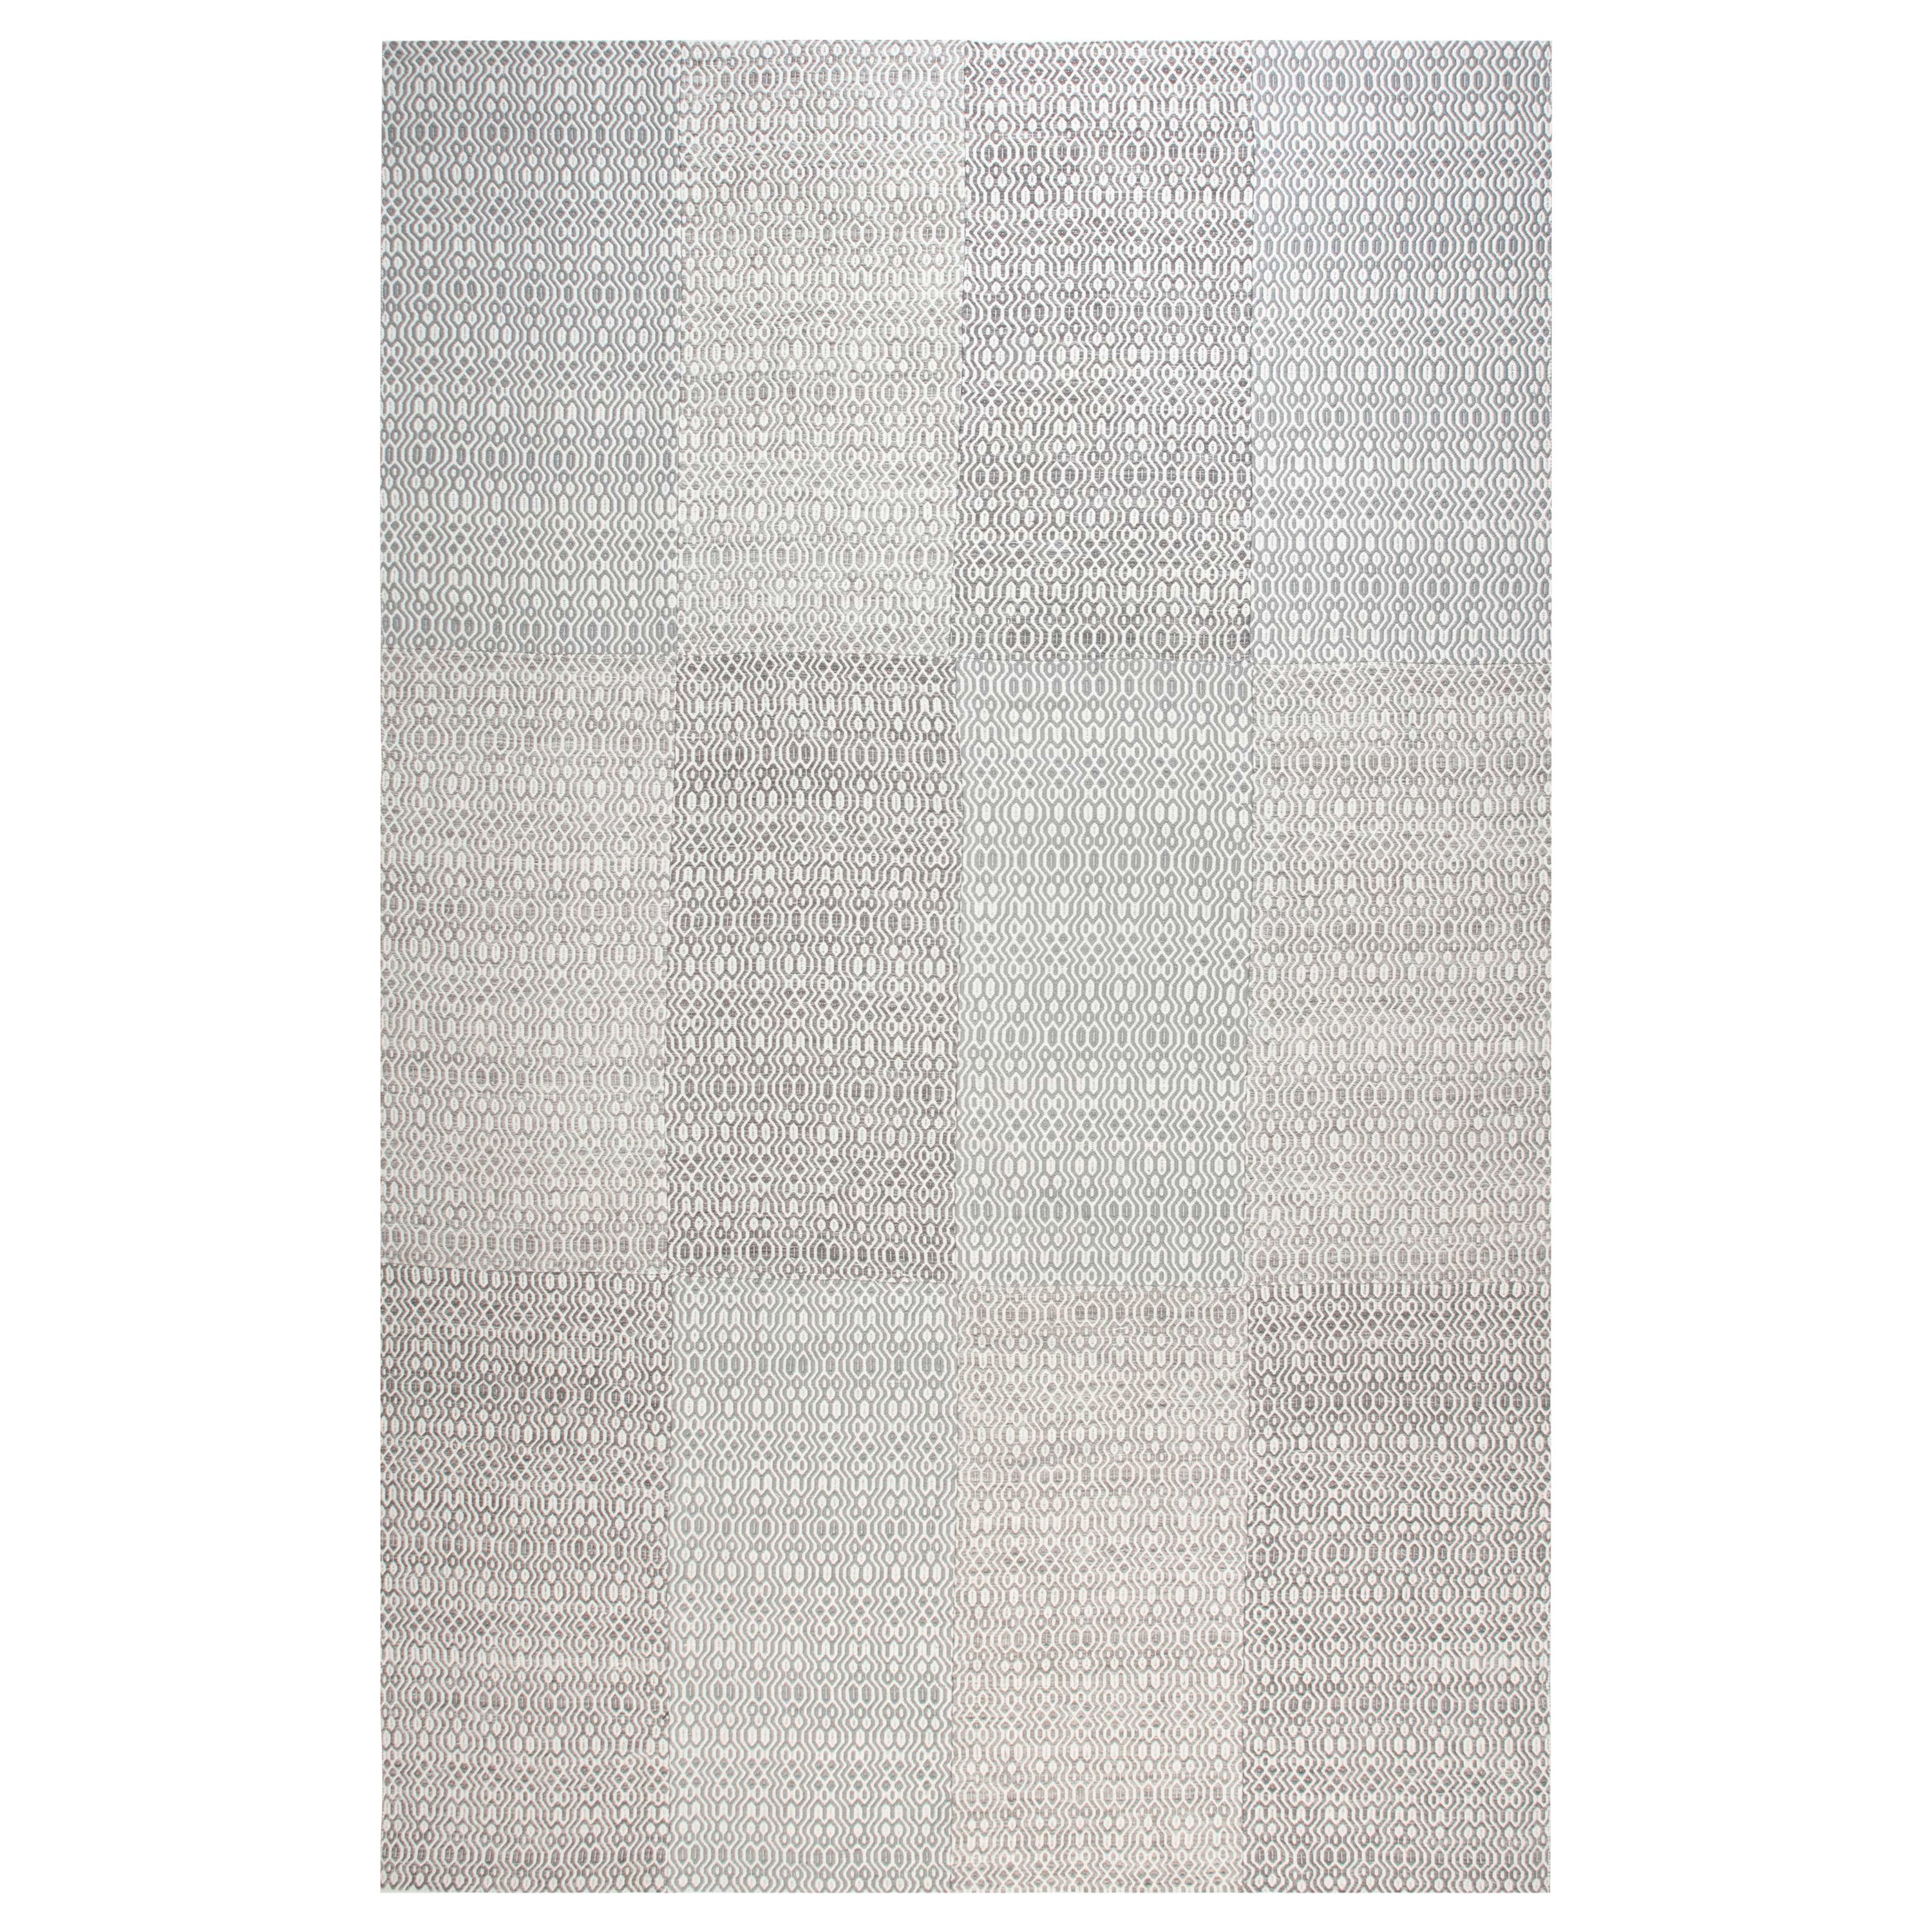 Contemporary White and Gray Flat-Weave Wool Rug by Doris Leslie Blau For Sale